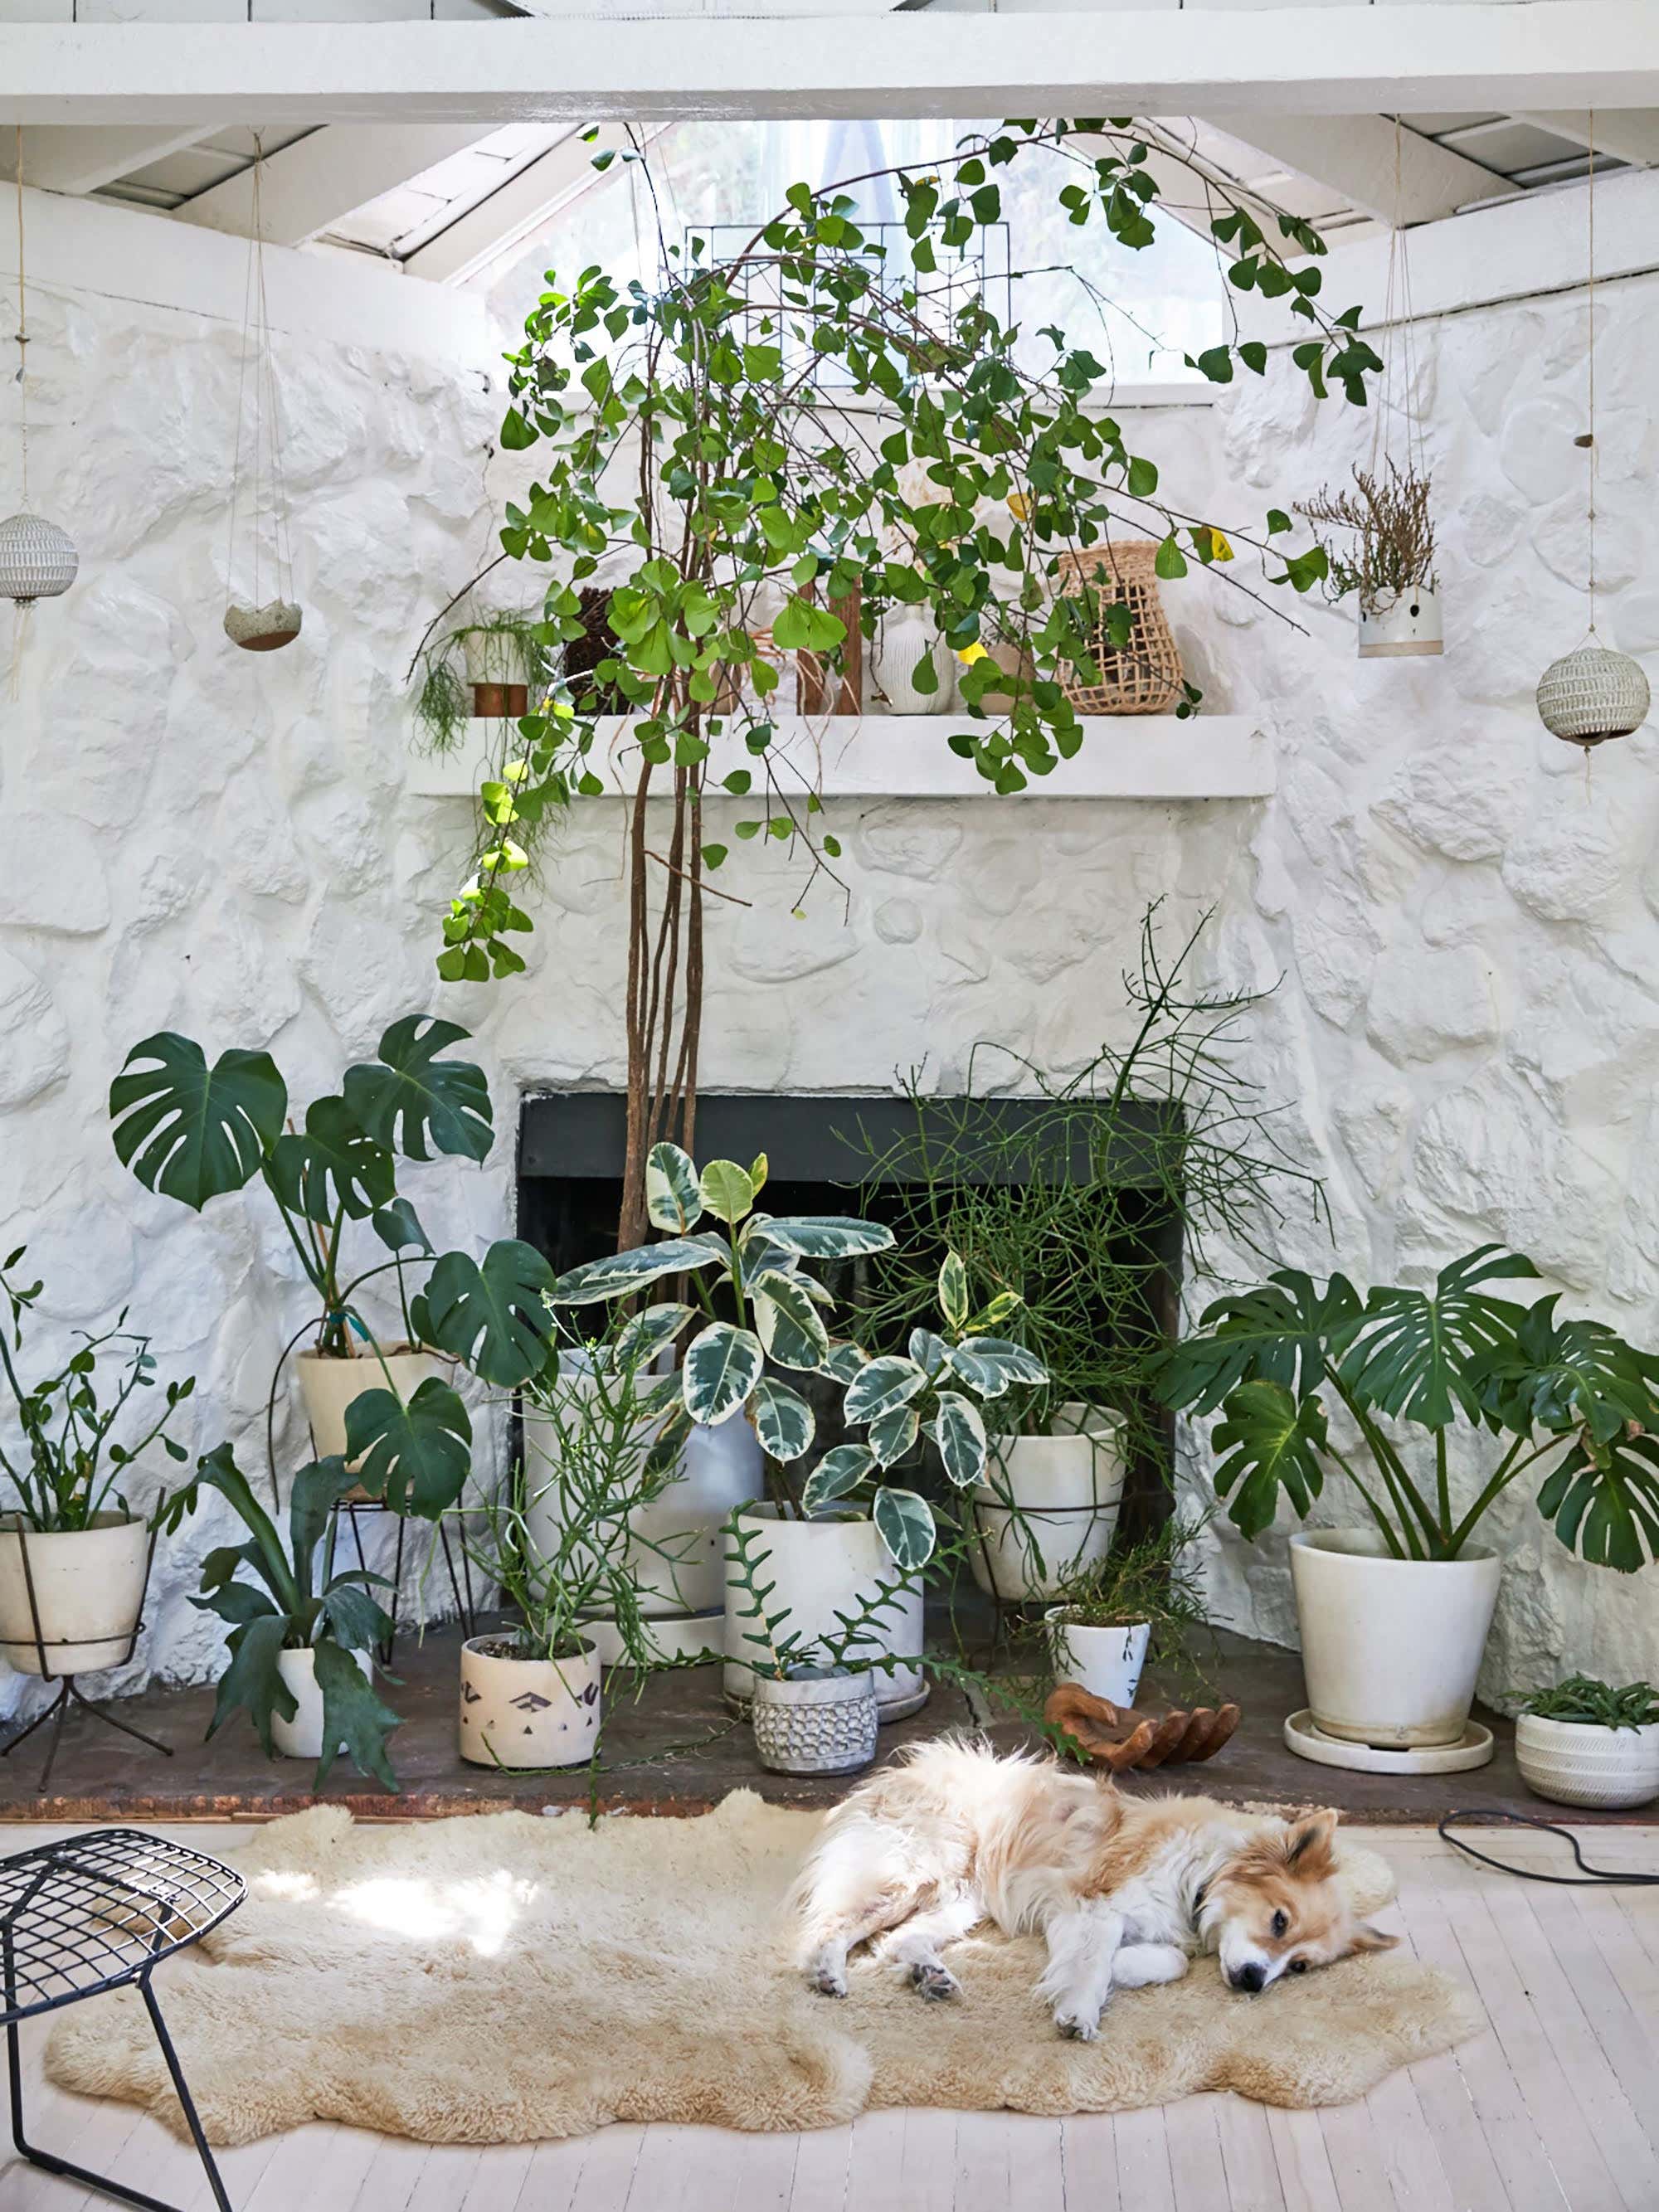 What Greenery to Buy, According to Your Plant Parent Personality